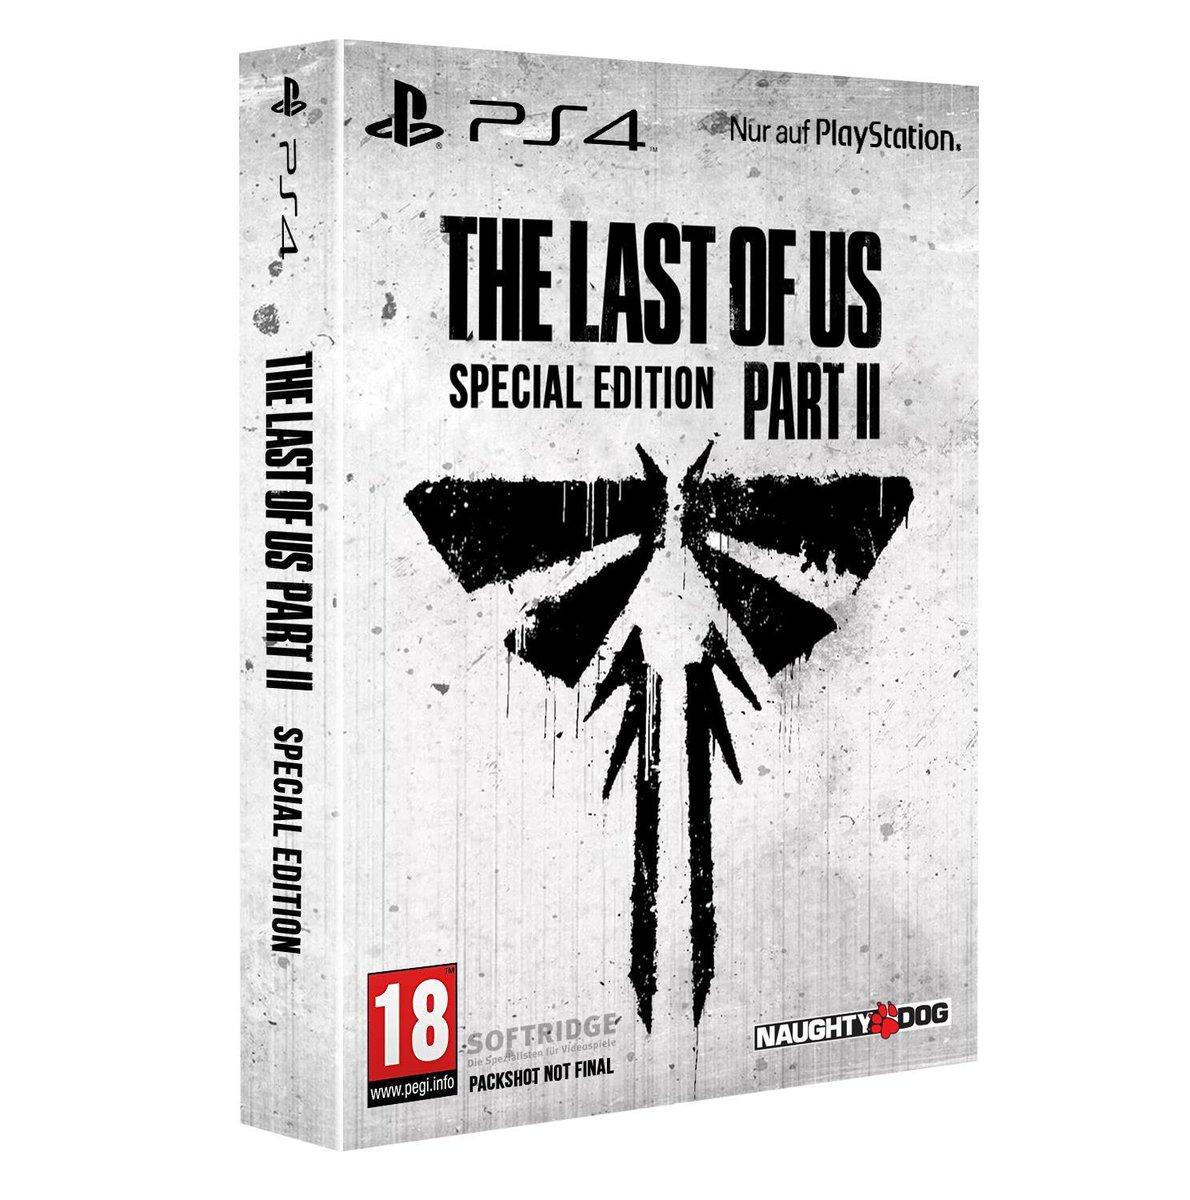 the last of us part ii with limited edition steelbook